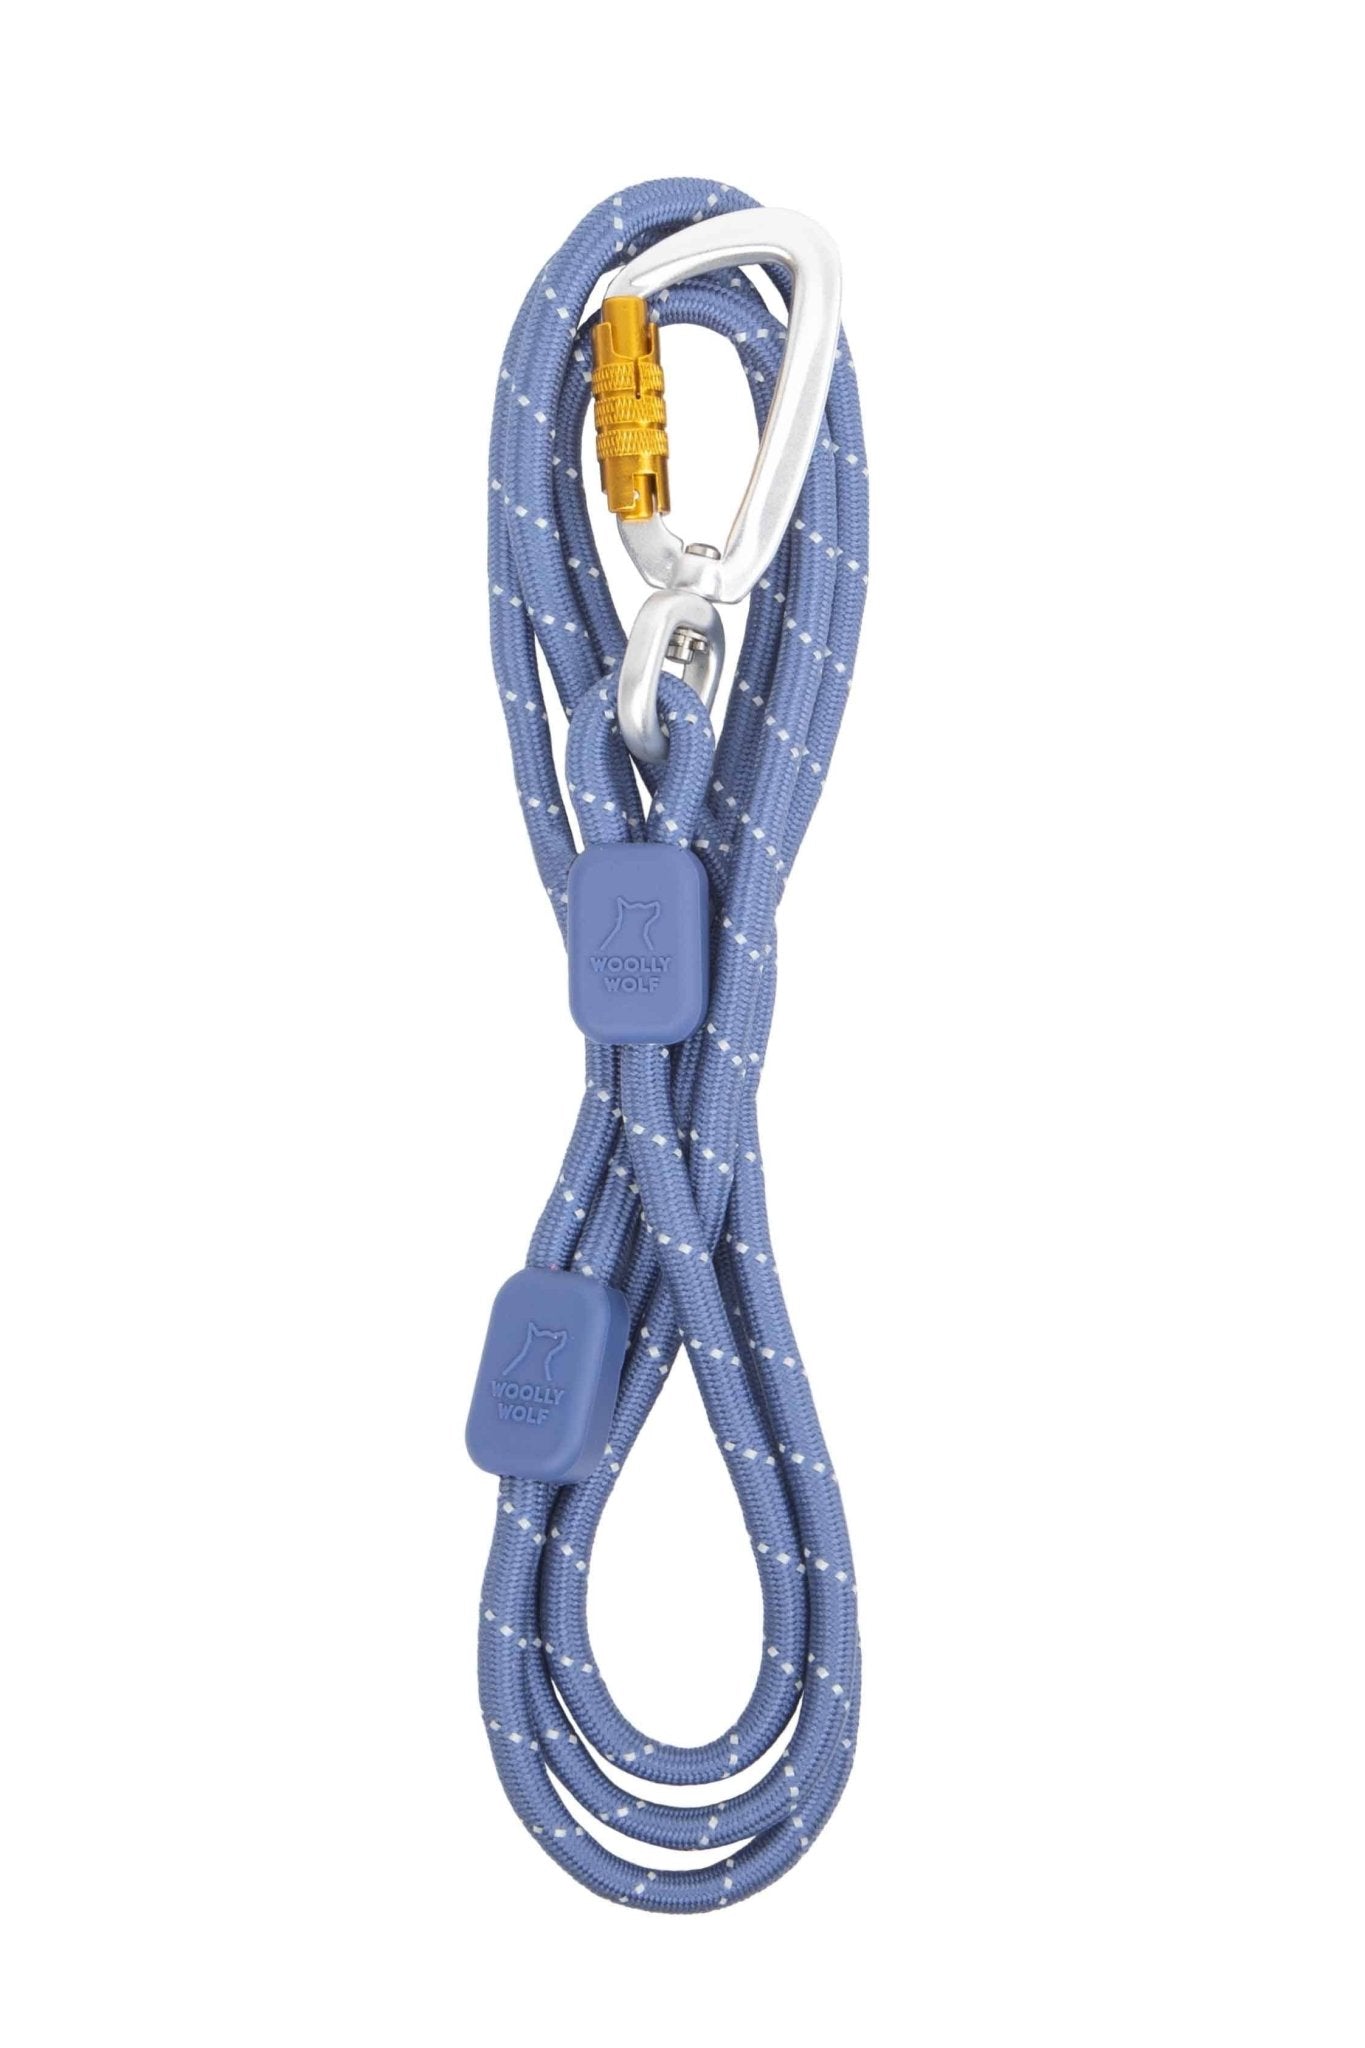 Thin Rope Dog Lead Made From Recycled Bottles, Pigeon Blue, 180 cm, 8mm - Sparkly Tails